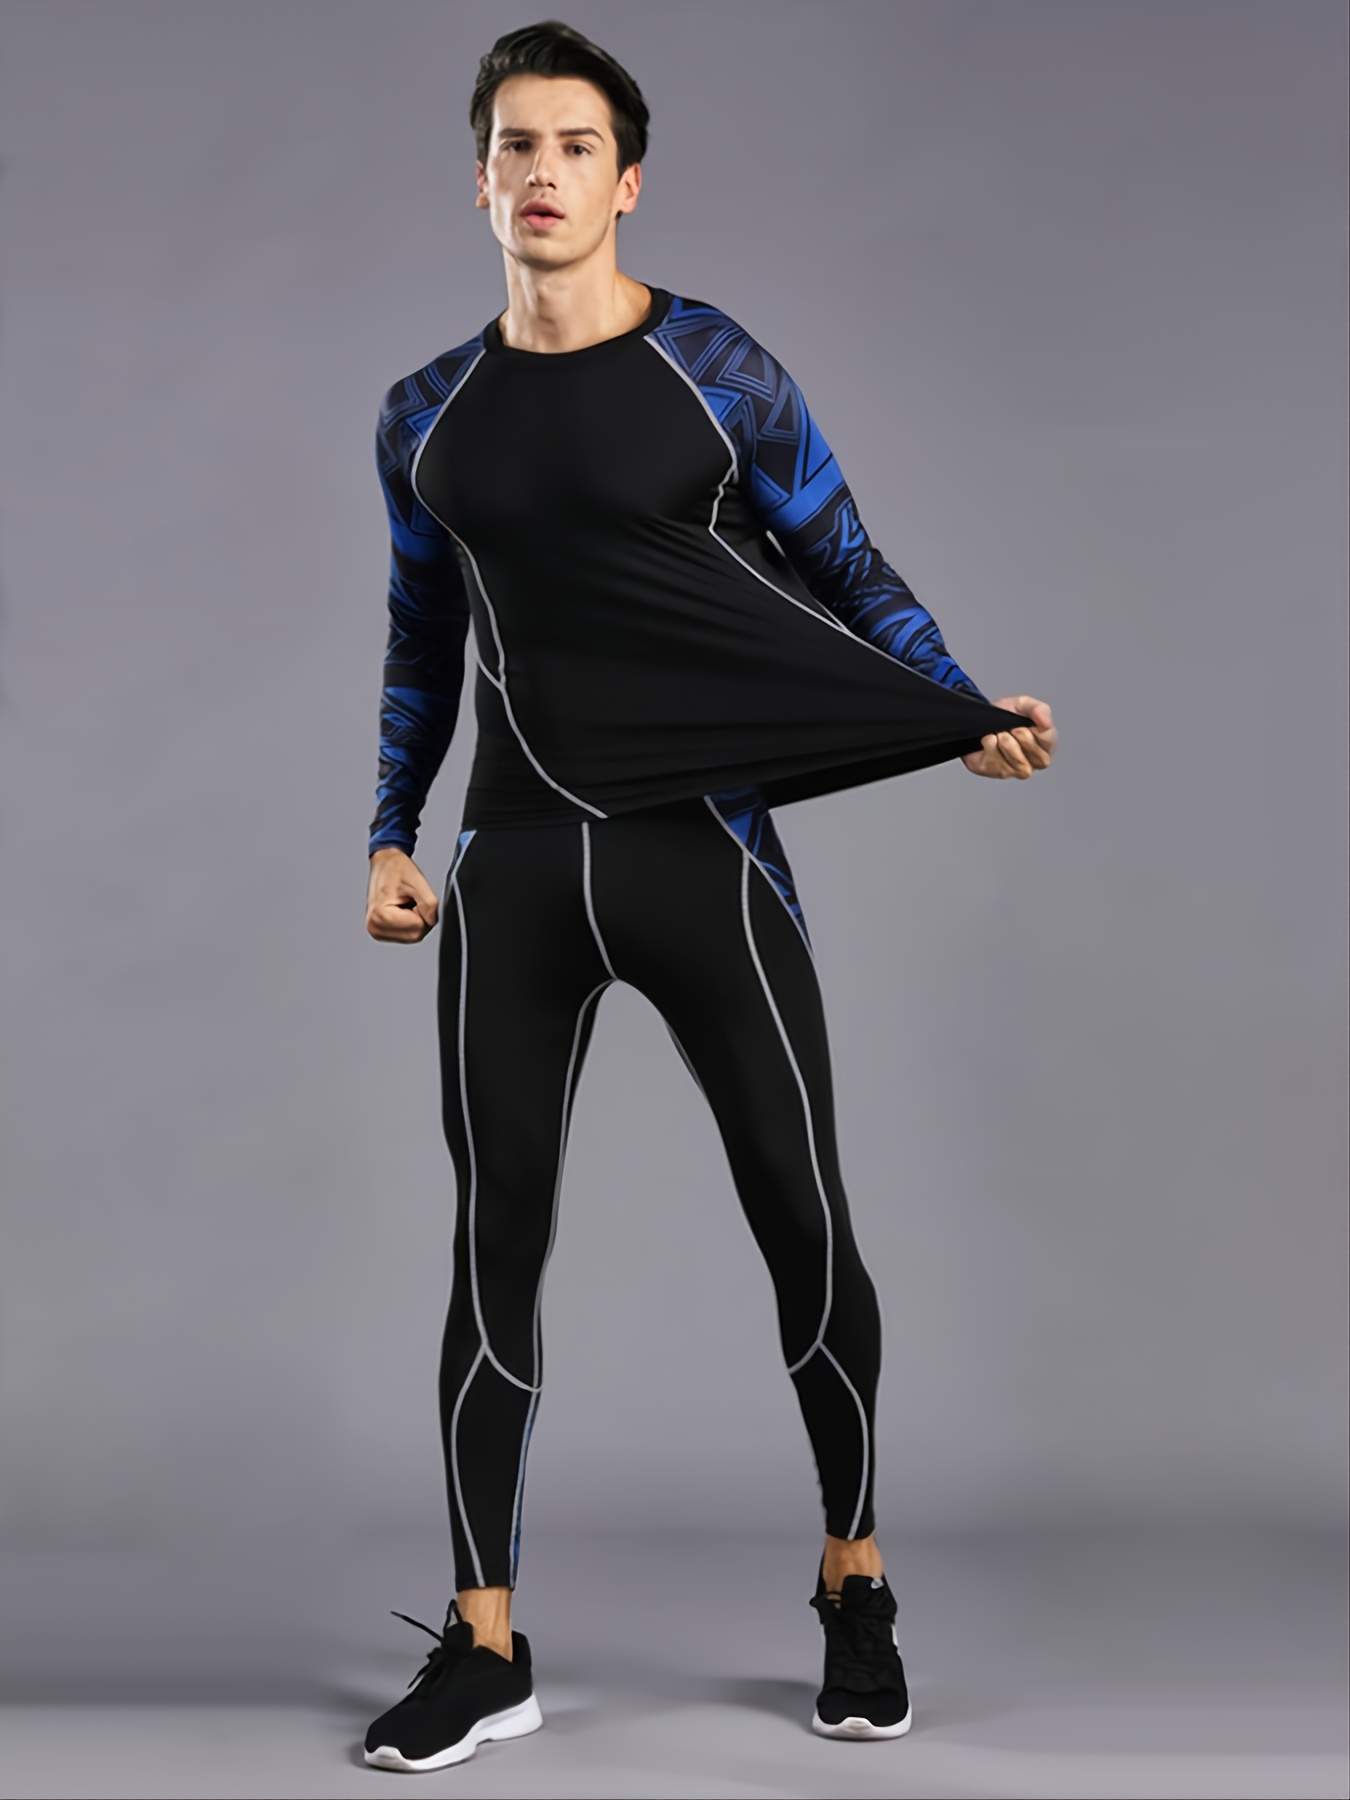 Fitness Sports Quick Dry Tights Men Running T-Shirt Tee Tops Gym